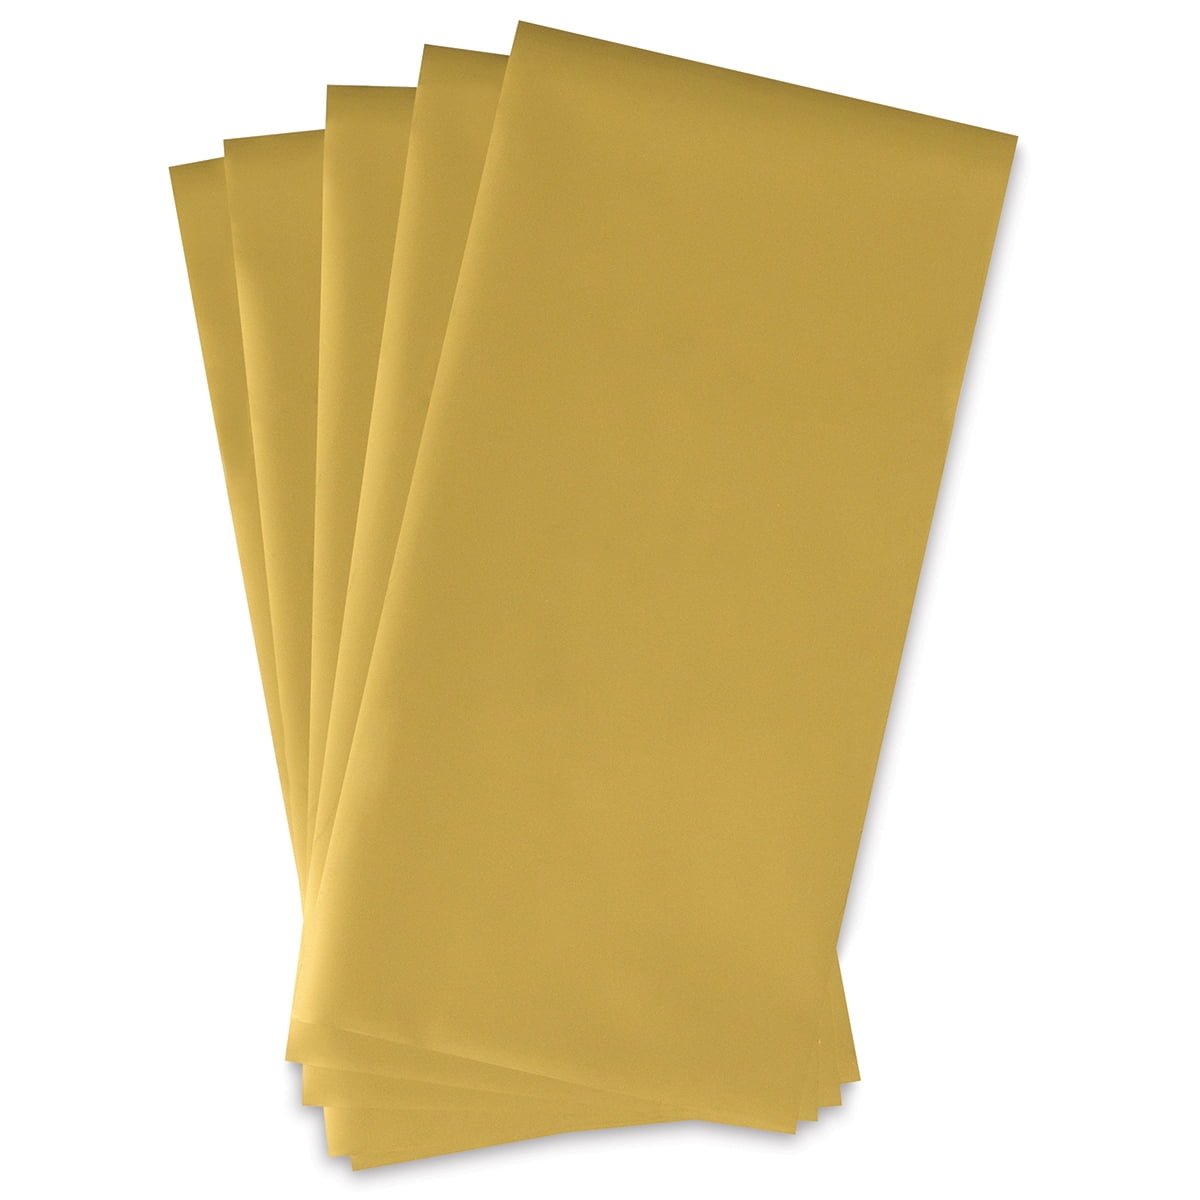 Gold Foil Transfer Sheets by Recollections™, 5.5 x 5.5